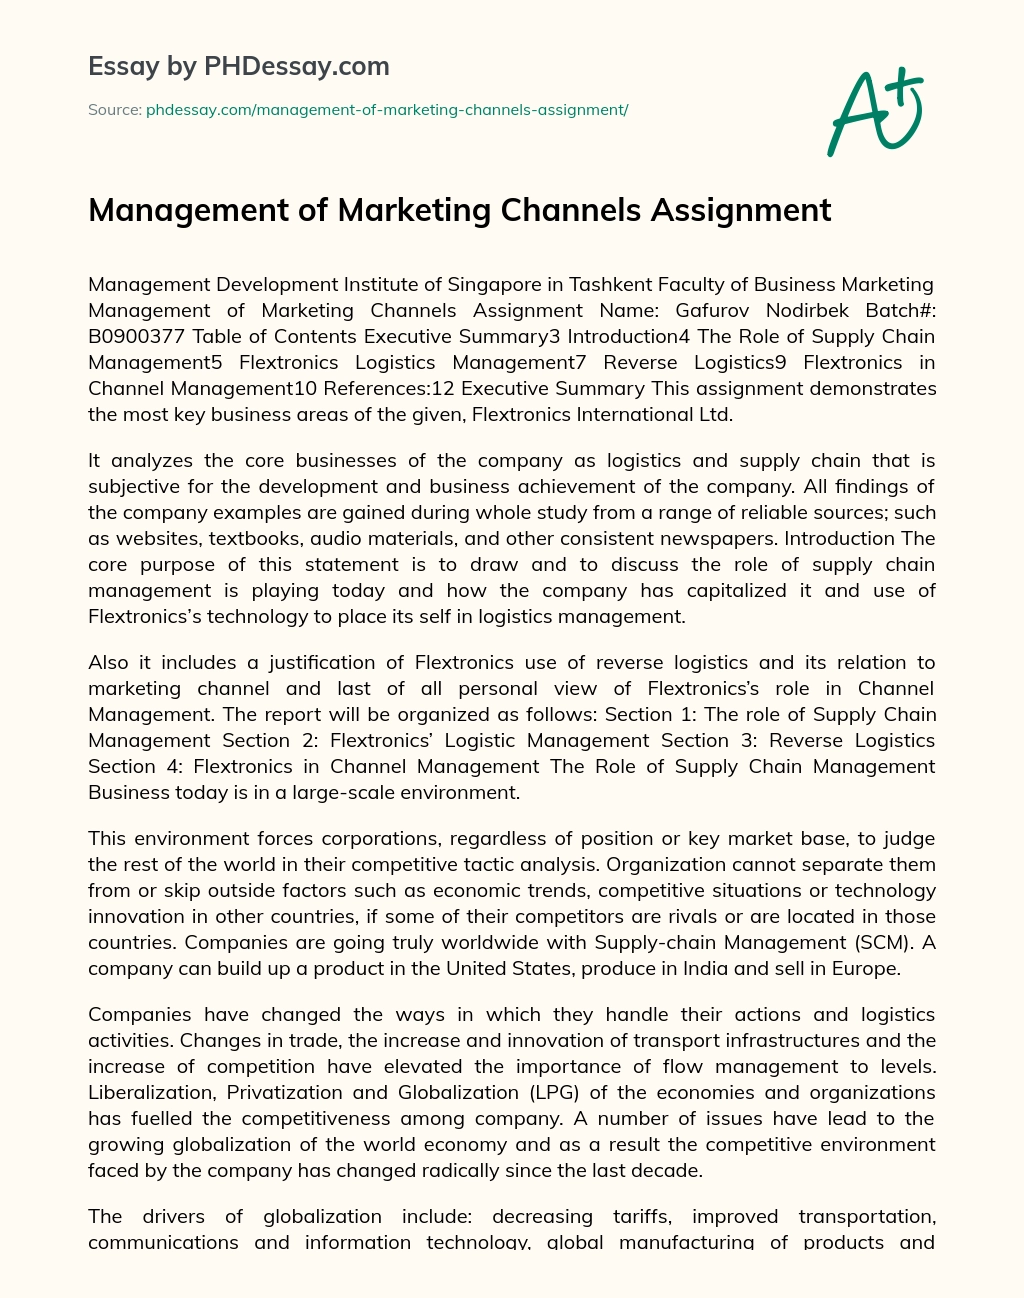 Management of Marketing Channels Assignment essay